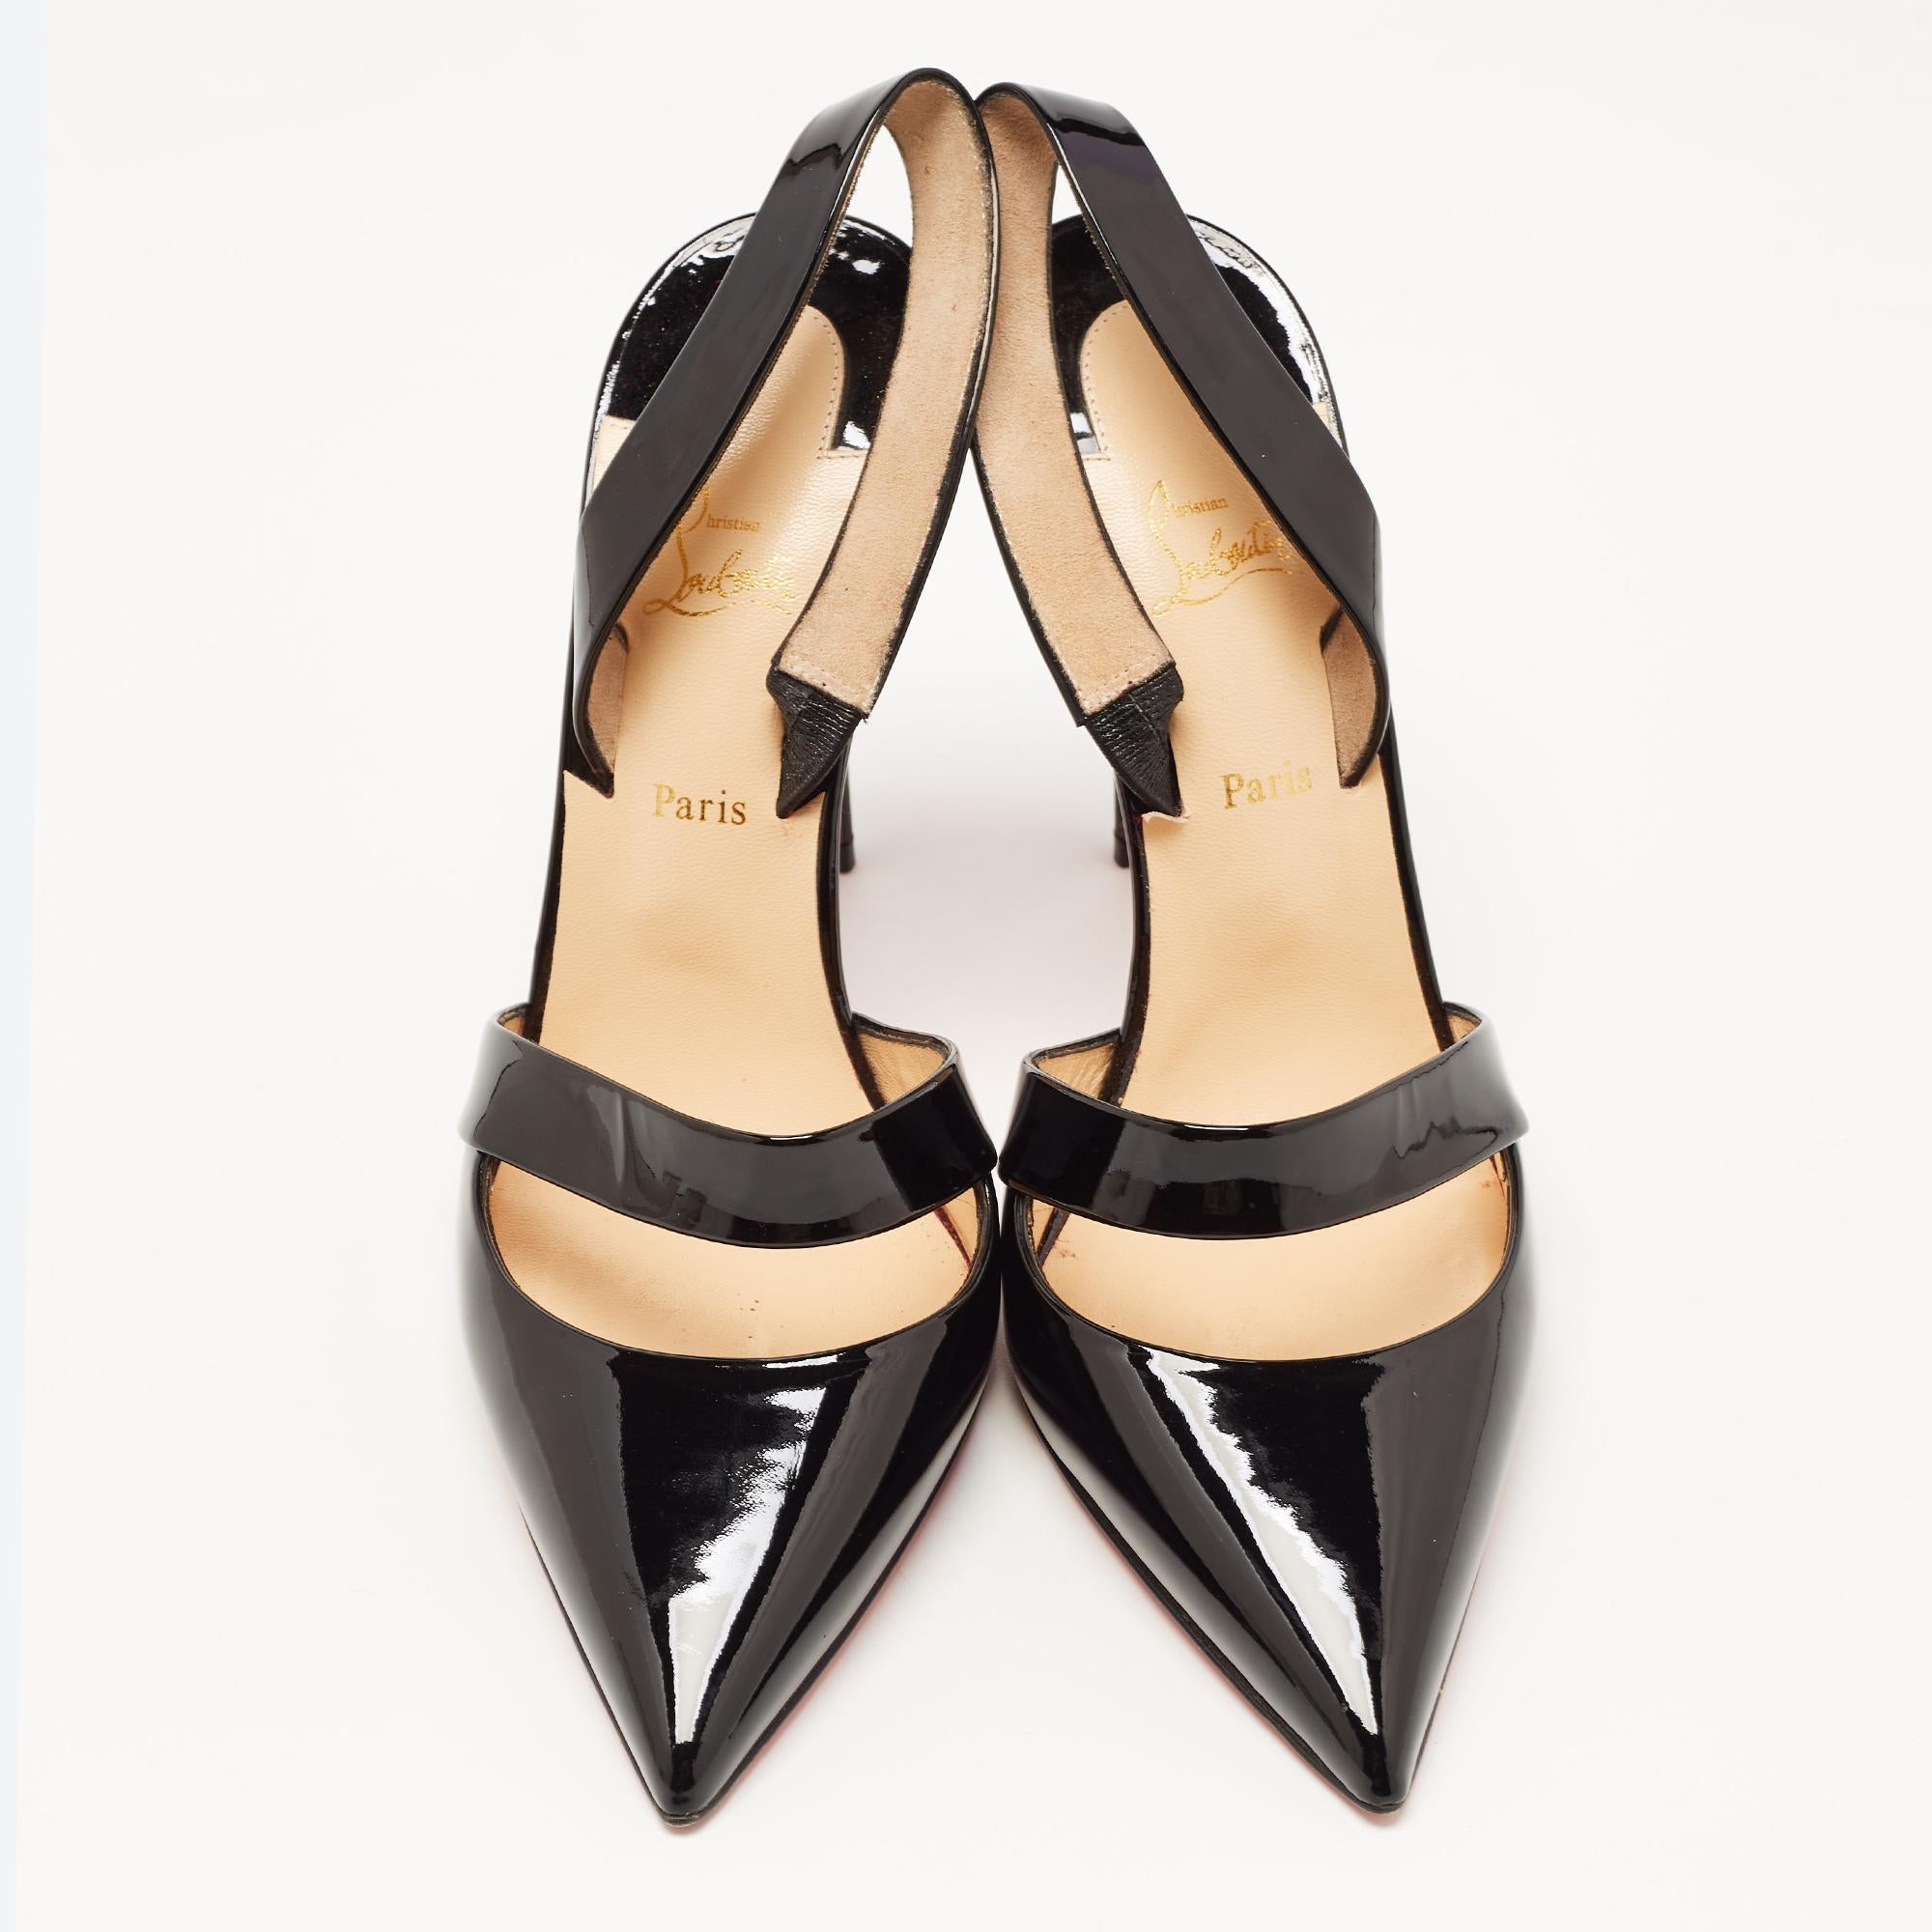 The fashion house’s tradition of excellence, coupled with modern design sensibilities, works to make these Christian Louboutin pumps a fabulous choice. They'll help you deliver a chic look with ease.

Includes: Original Dustbag

